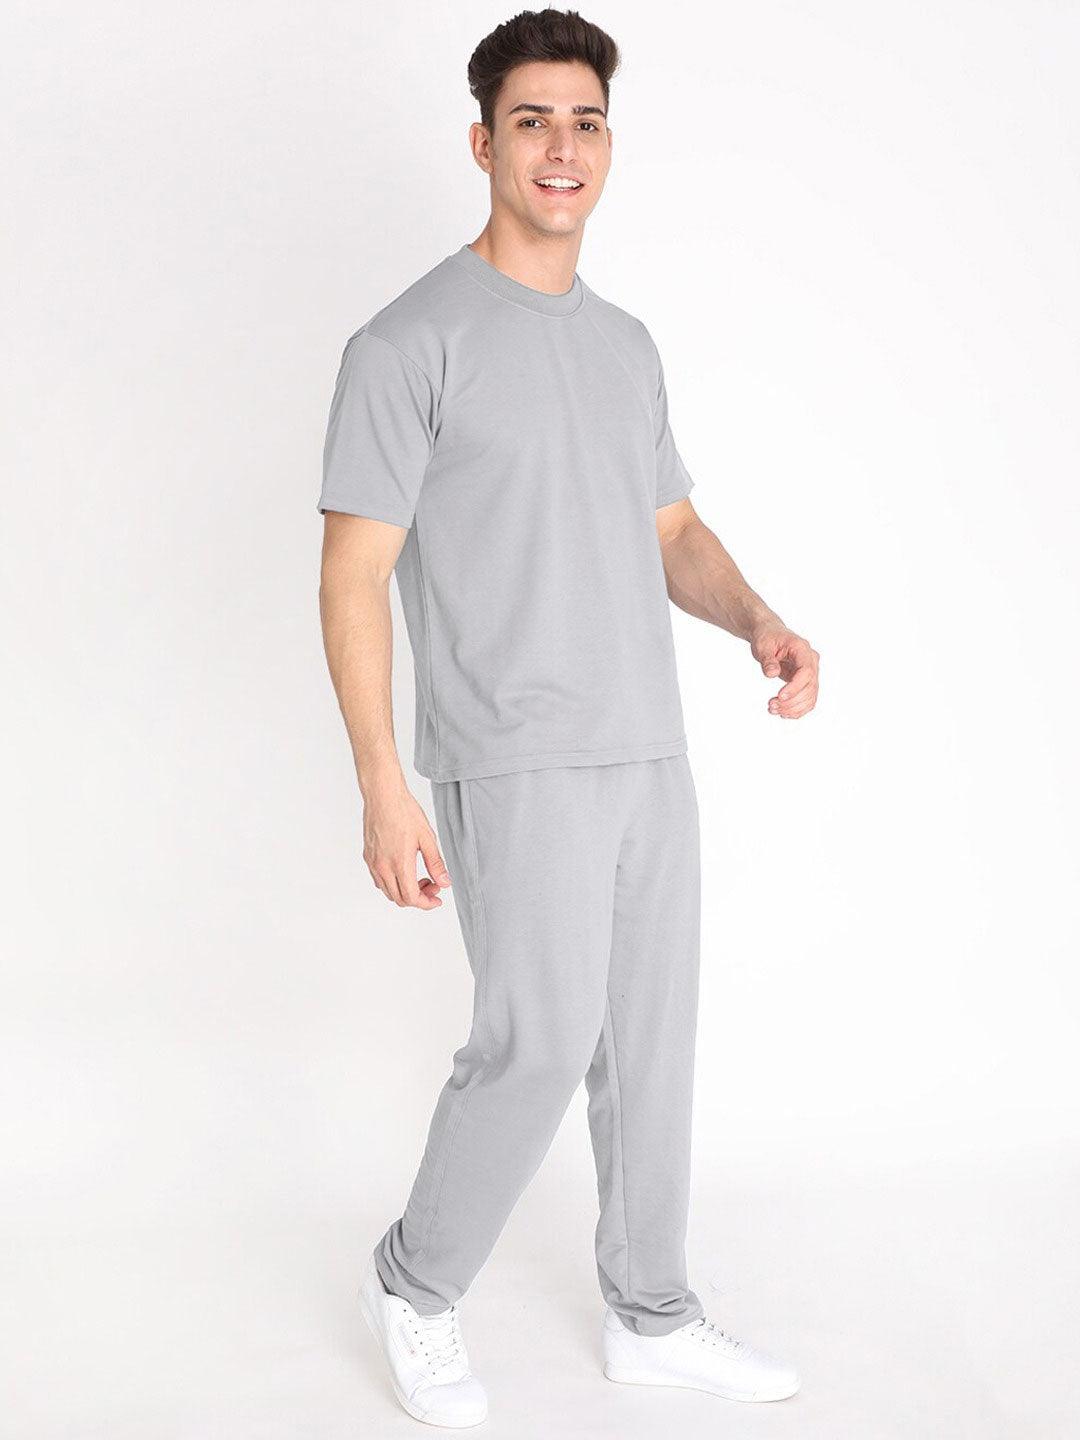 Mens Full Track Suits in Gray Colour - Aadhitri